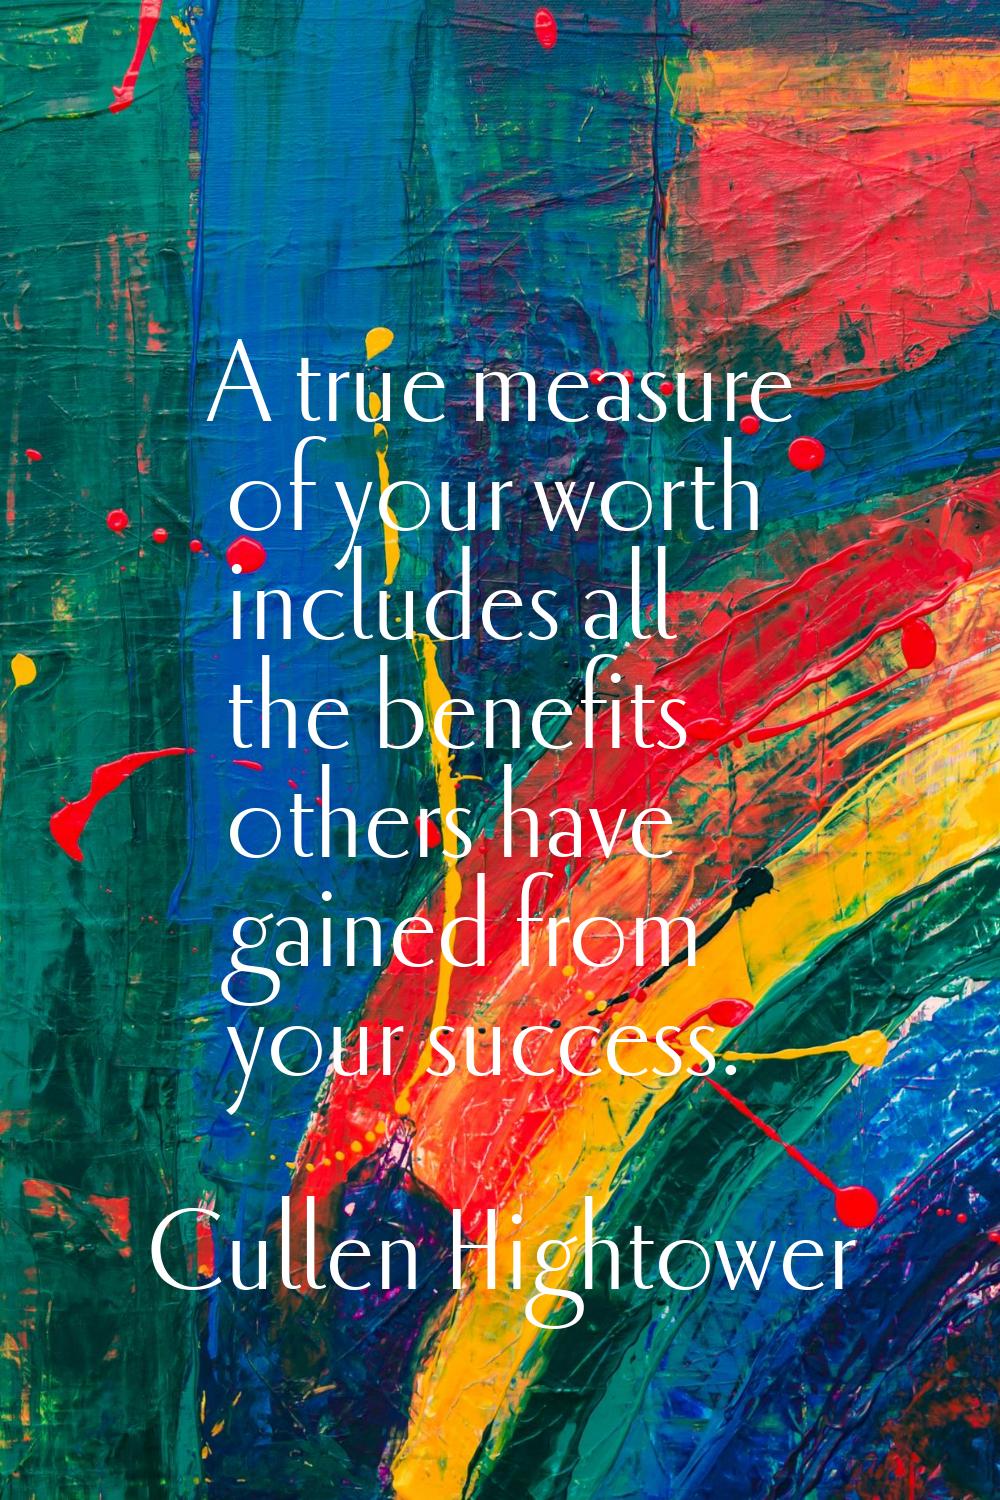 A true measure of your worth includes all the benefits others have gained from your success.